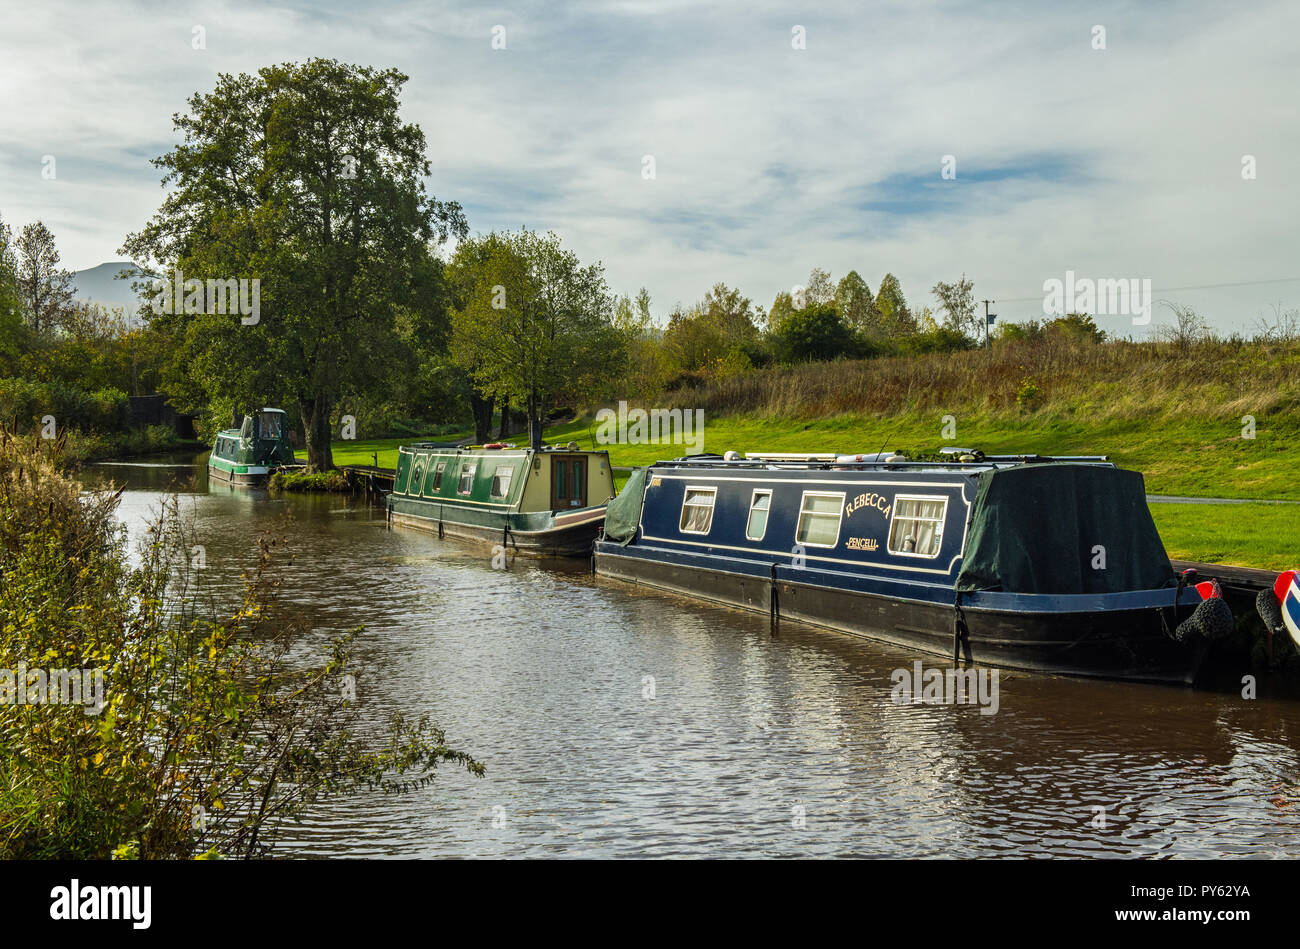 Narrowboats moored up at Pencelli on the Monmouthshire and Brecon Canal in the Brecon Beacons south Wales Stock Photo